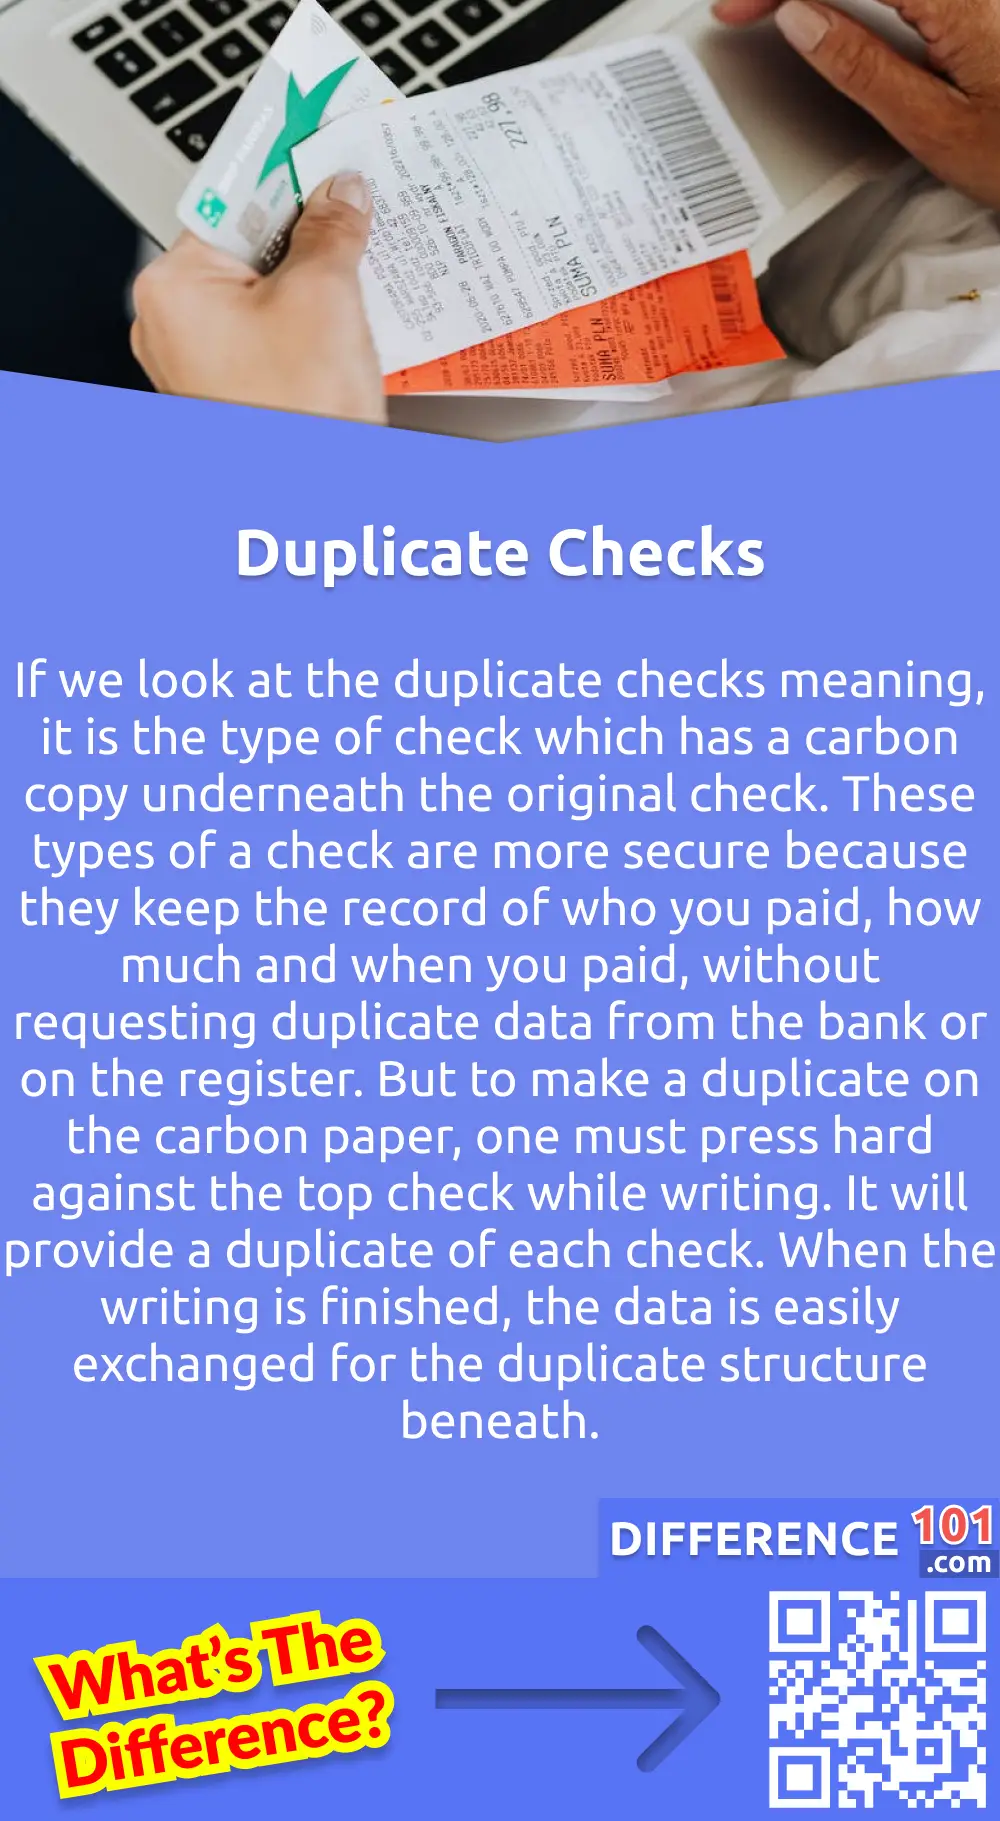 What Are Duplicate Checks?
If we look at the duplicate checks meaning, it is the type of check which has a carbon copy underneath the original check. These types of a check are more secure because they keep the record of who you paid, how much and when you paid, without requesting duplicate data from the bank or on the register. But to make a duplicate on the carbon paper, one must press hard against the top check while writing. It will provide a duplicate of each check. When the writing is finished, the data is easily exchanged for the duplicate structure beneath. The duplicate checkbook is bulkier than the single one because there are a double number of pages. But there are always fewer numbers in a box than single checks due to the thicker checkbooks of duplicate checks. These are also more expensive than single checks.